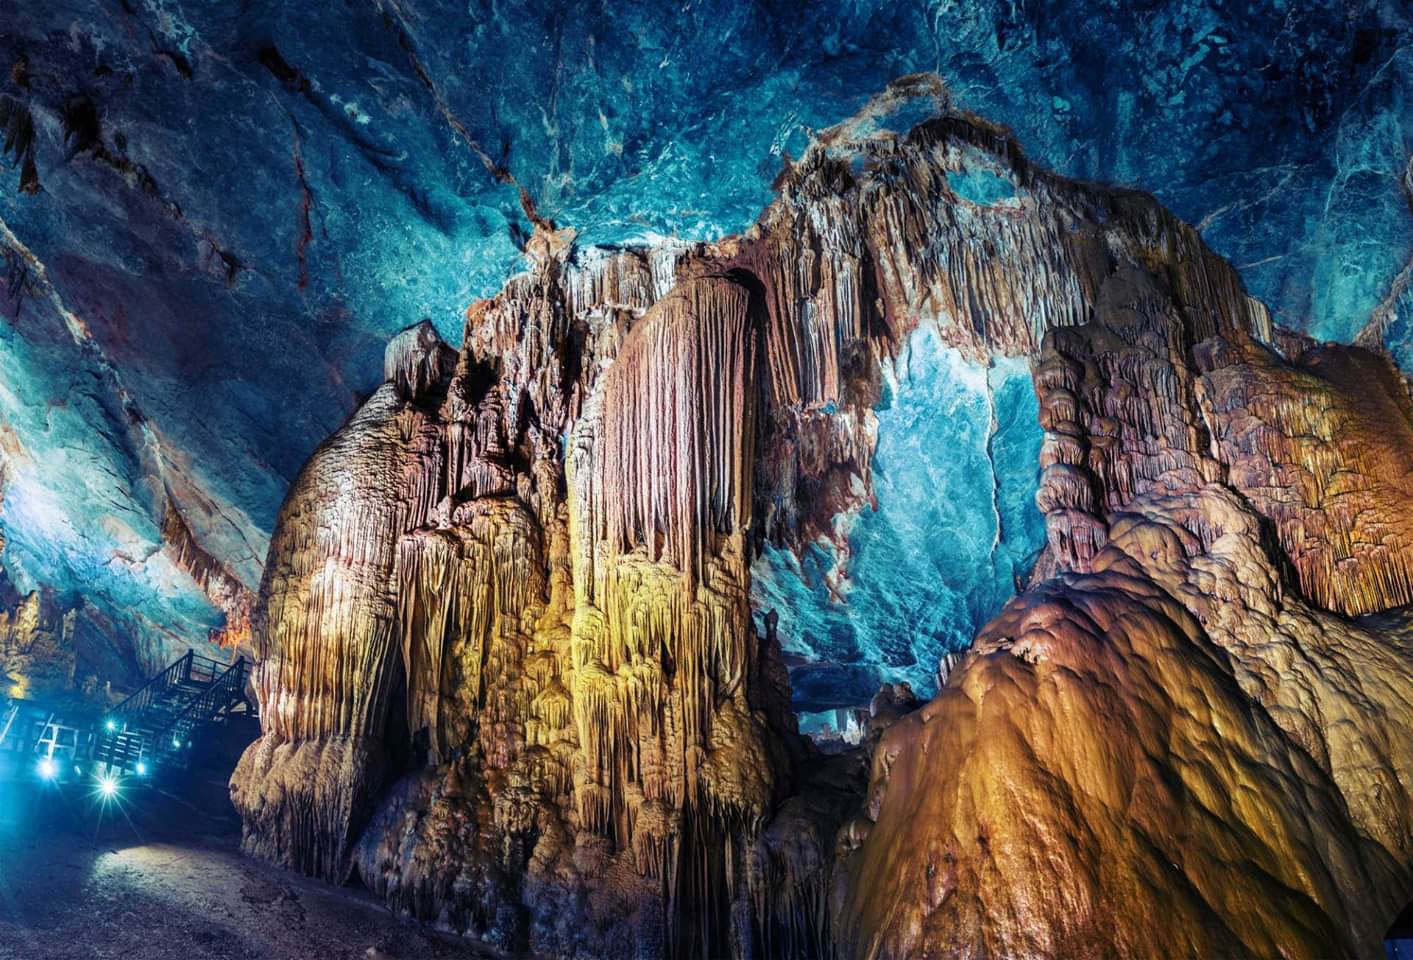 Thien Duong Cave is also known as the longest dry cave found in Asia